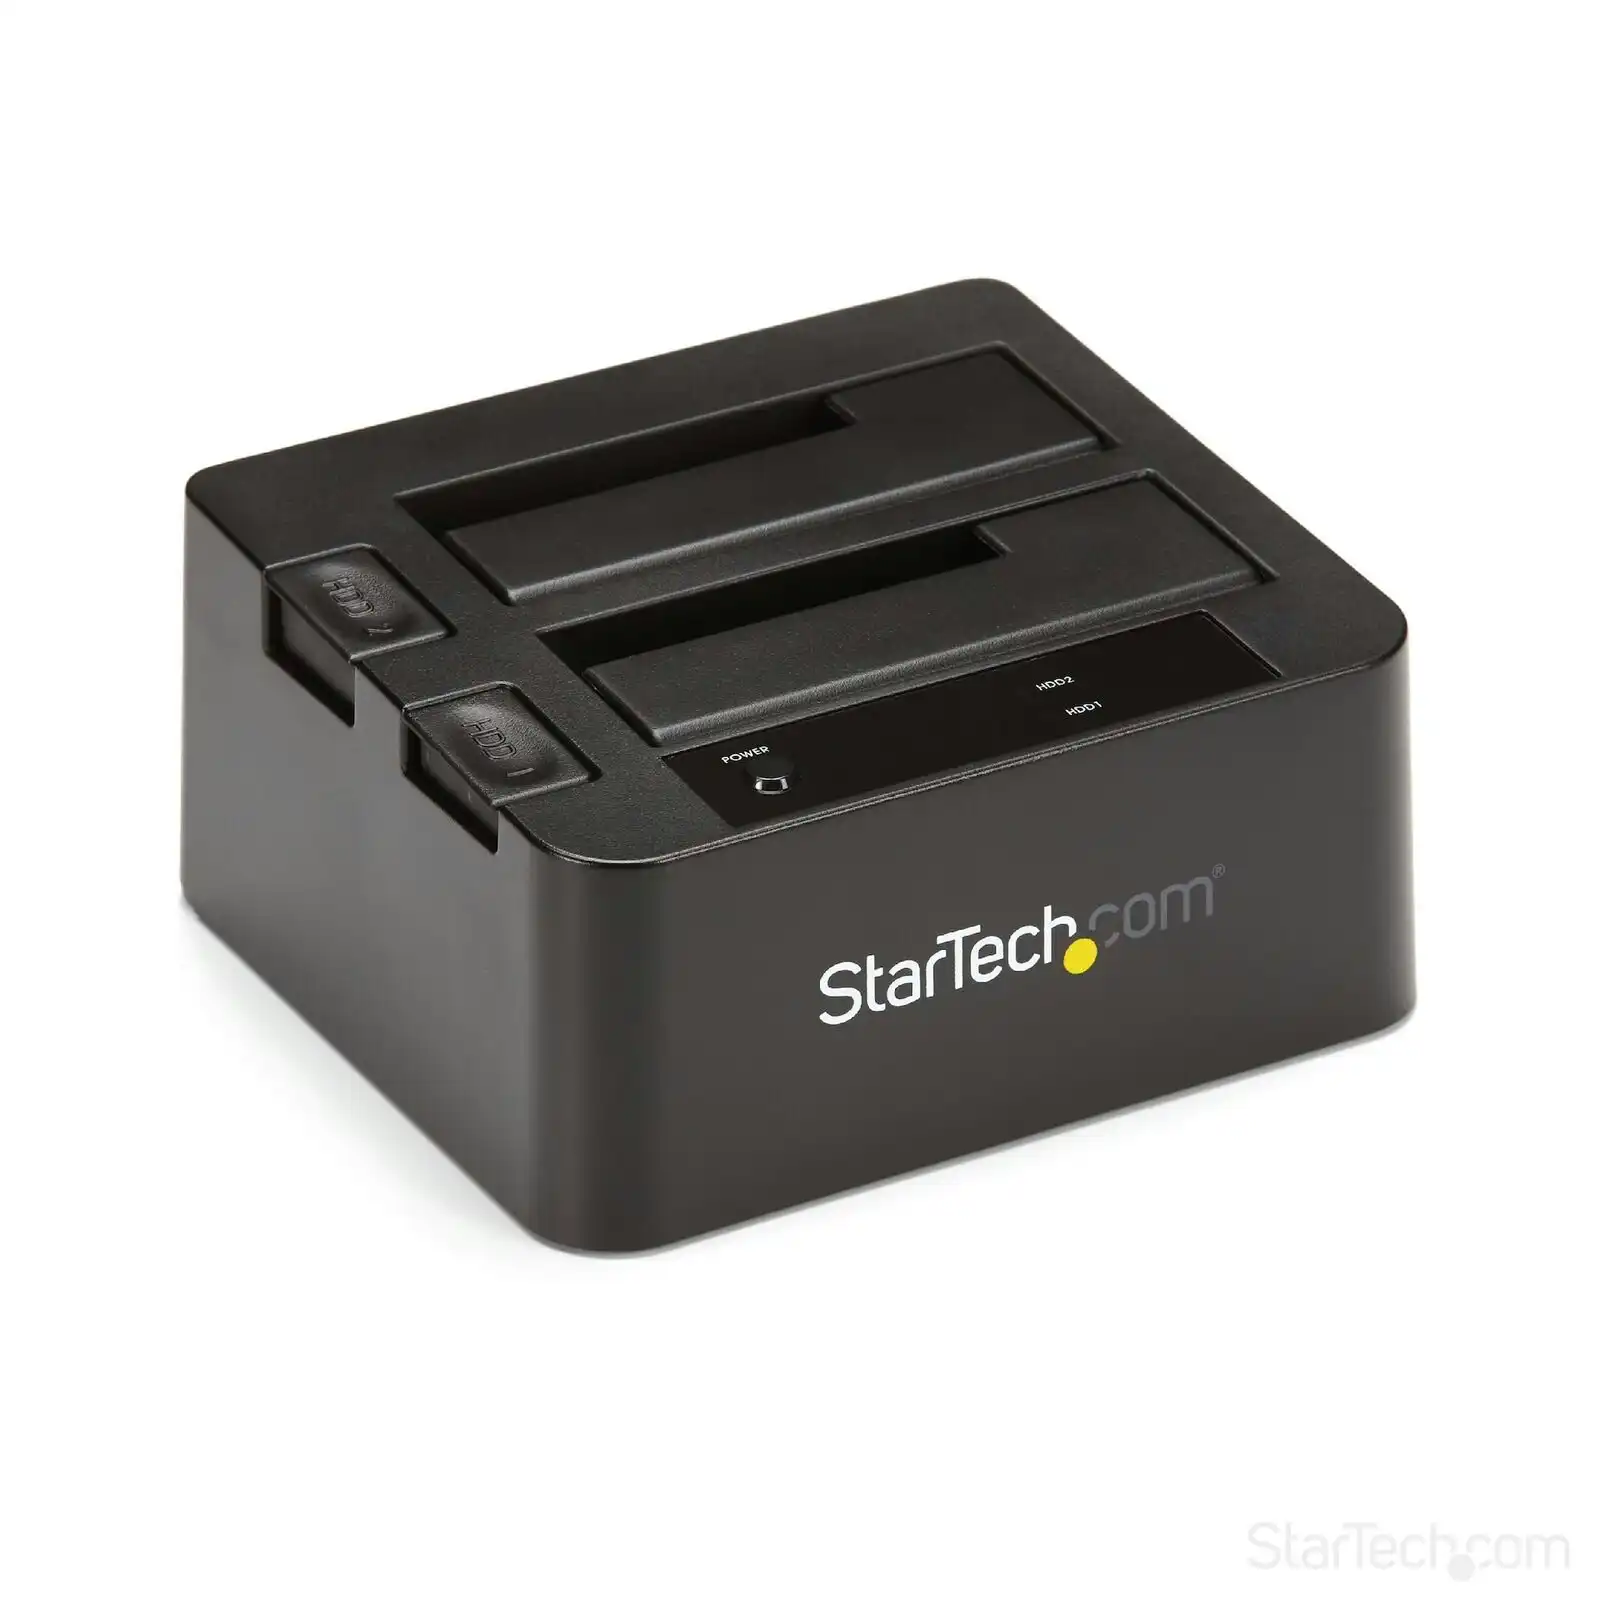 Star Tech USB 3.1 2-Bay Dock/Docking Station Stand for 2.5"/3.5" SATA SSD/HDD